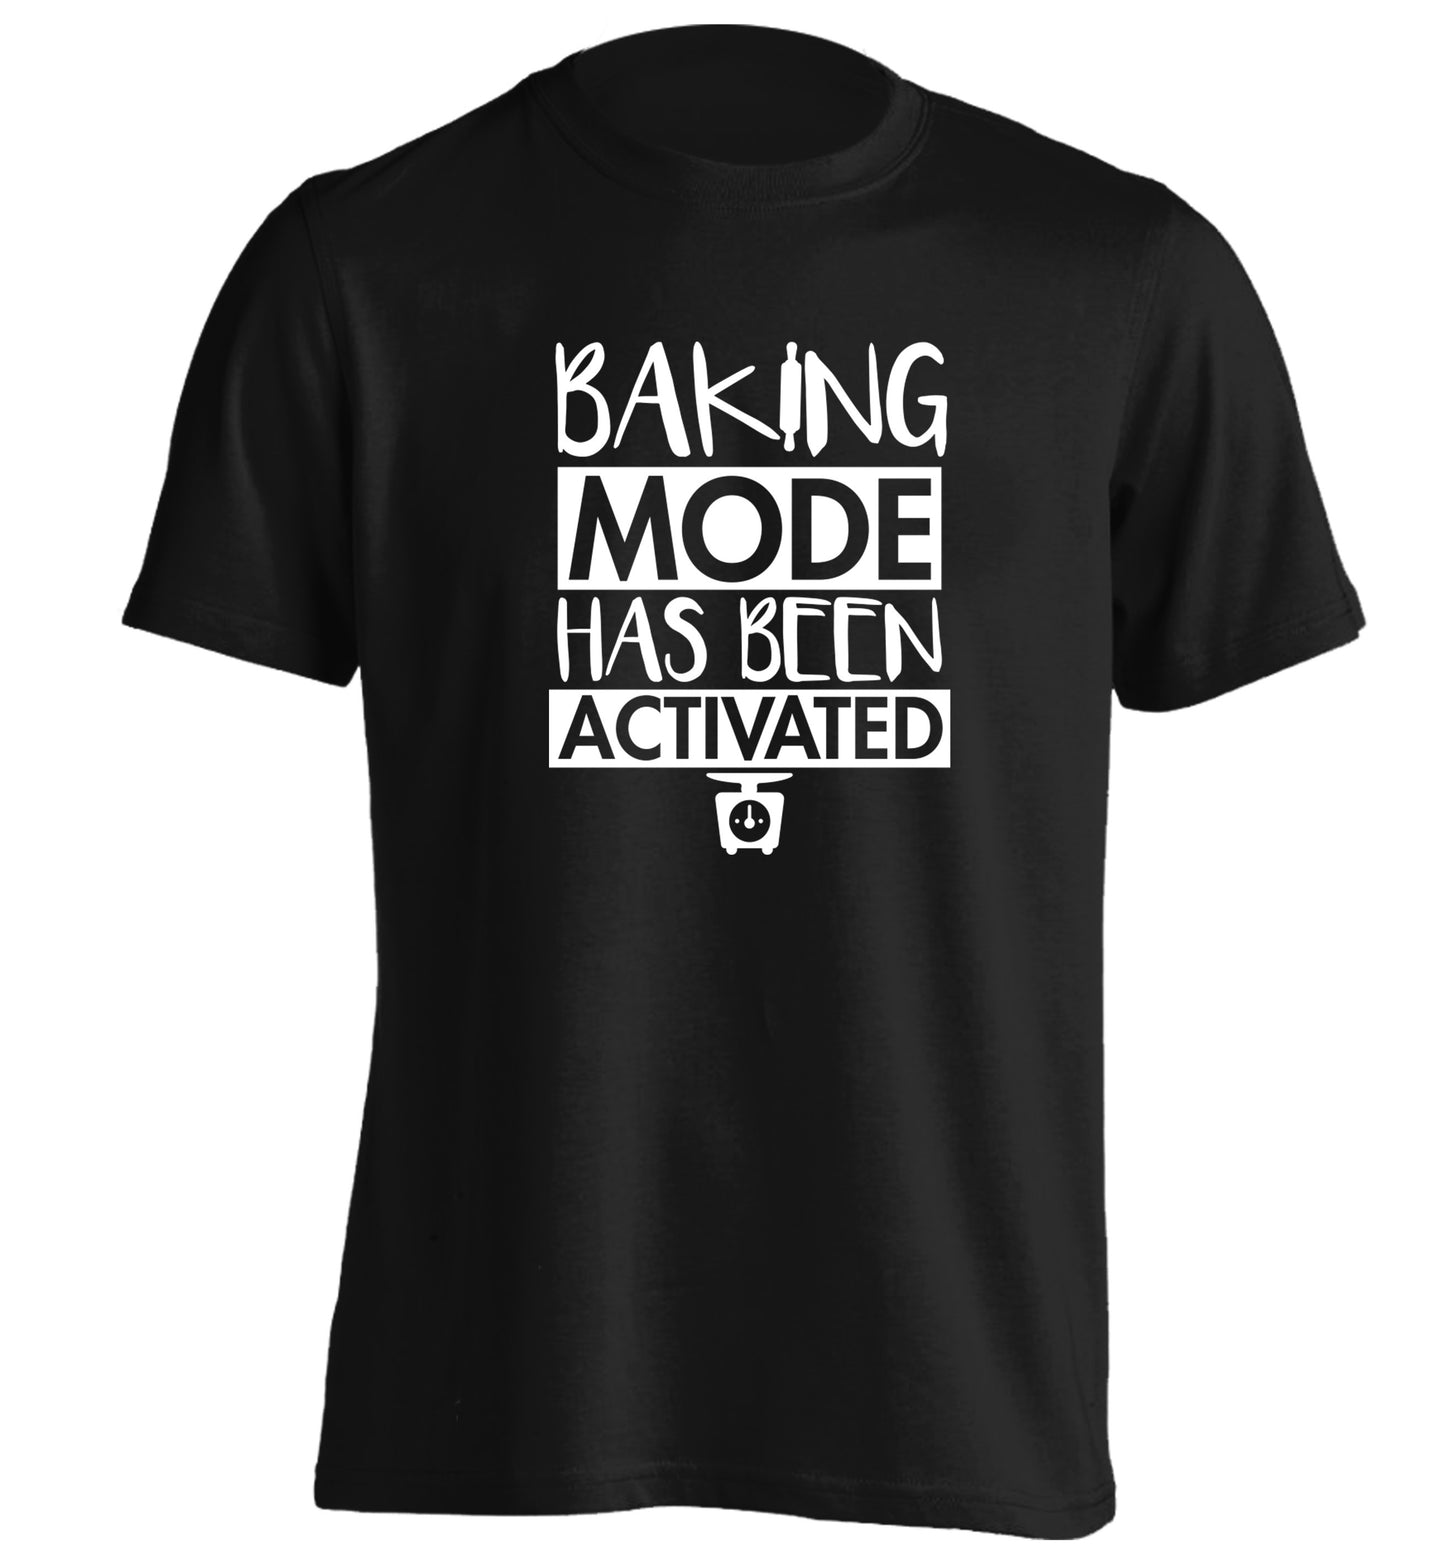 Baking mode has been activated adults unisex black Tshirt 2XL